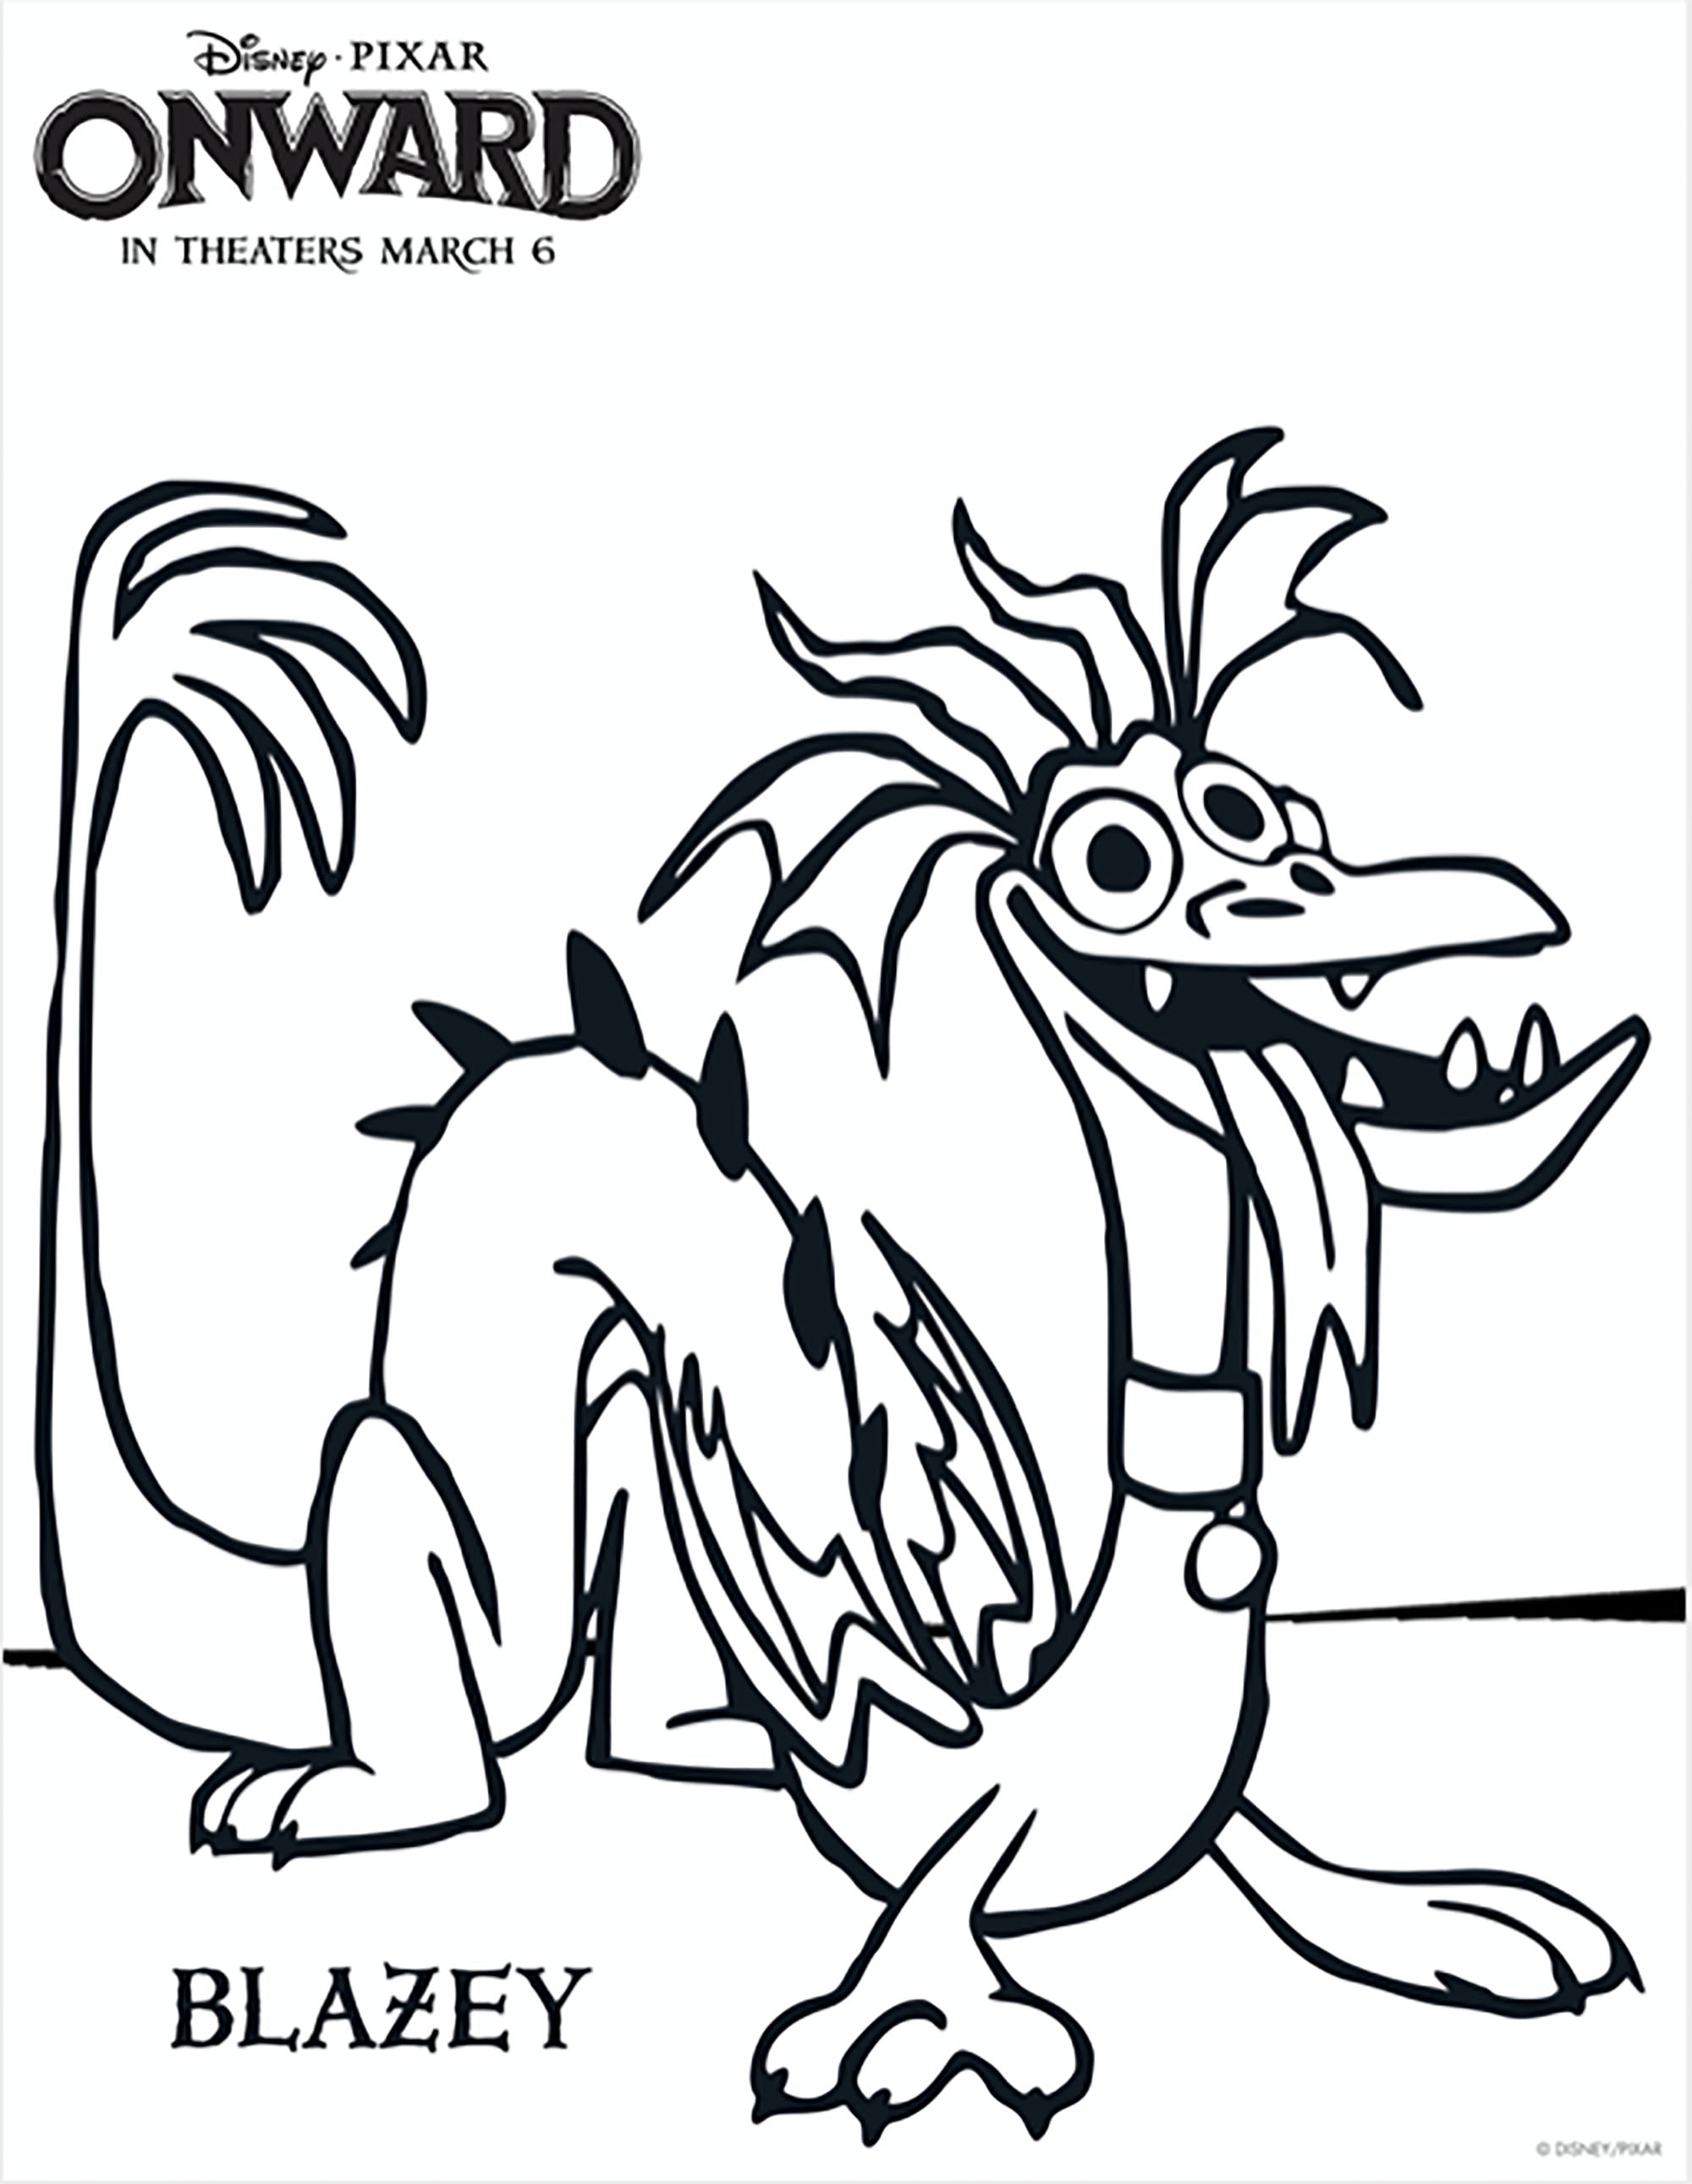 Simple Onward coloring page to download for free